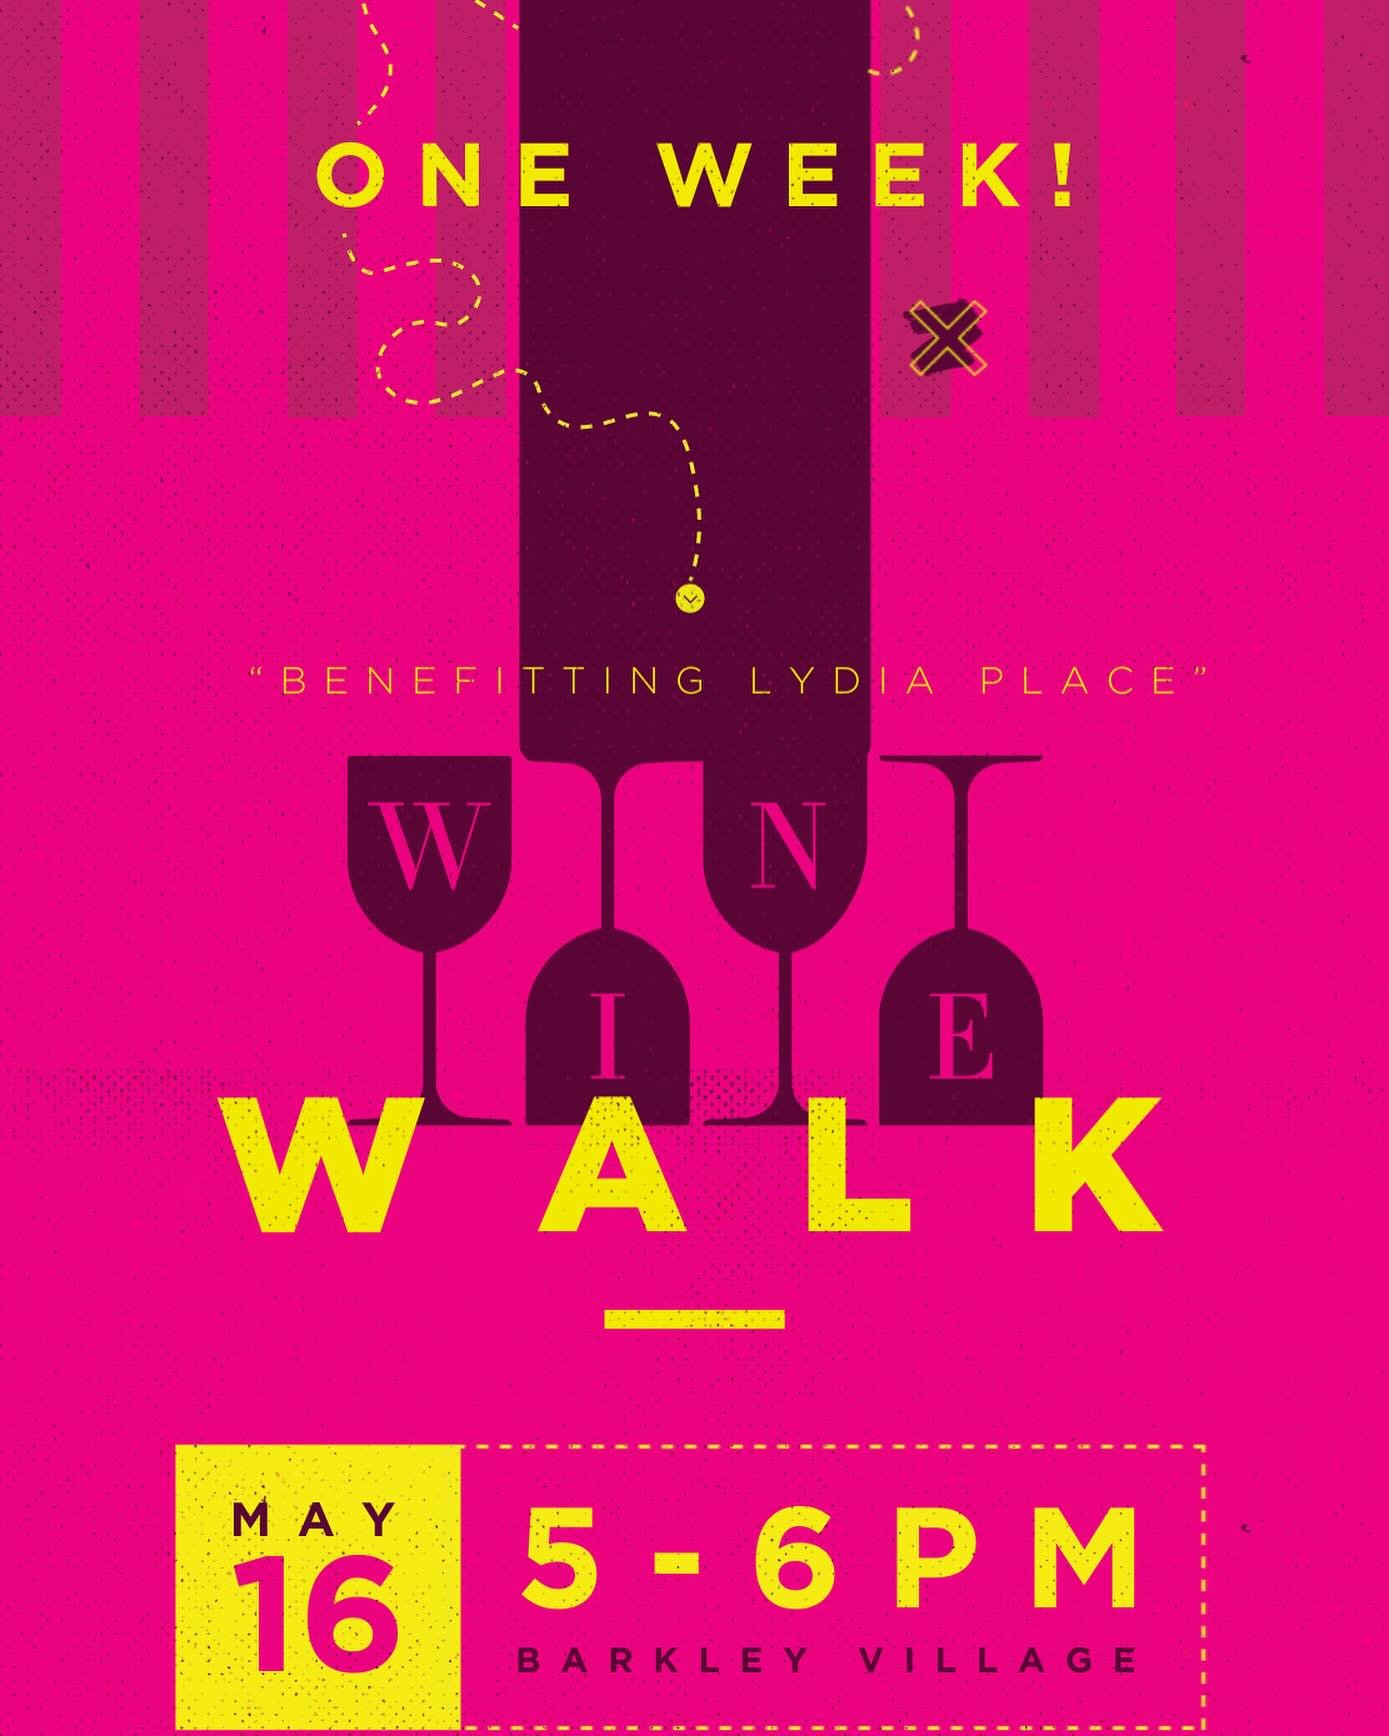 Barkley Village Wine Walk is one week away! Join us for an eventful evening in the Village. The weather forecast is looking sunny! 🤞link in bio more more info or tickets.